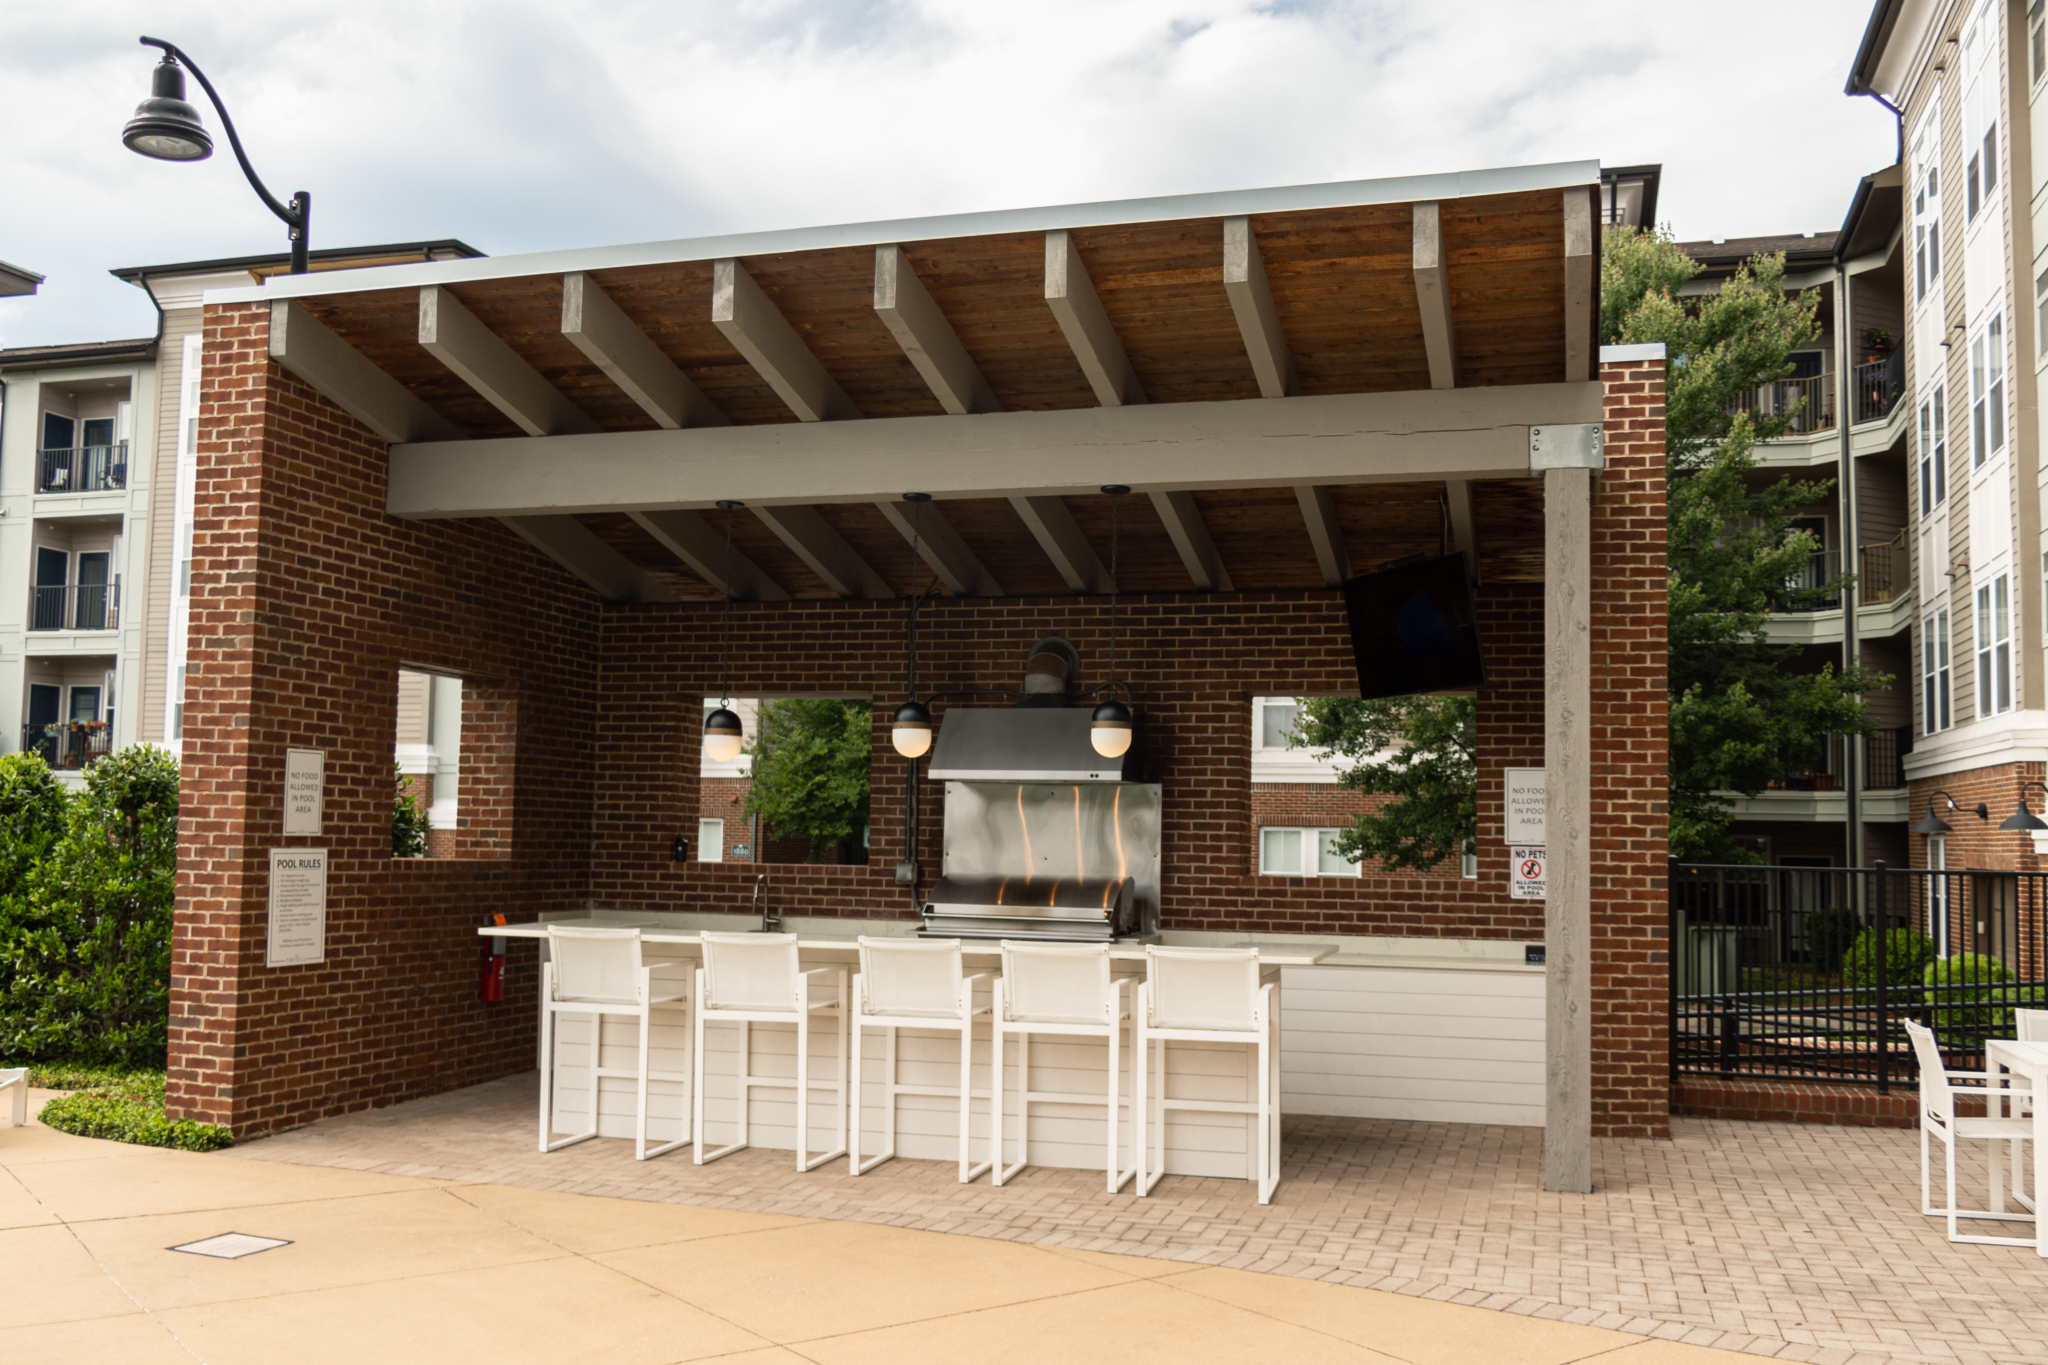 Grill These 3 outdoor luxuries at The Hill at Eastbury are an entertainer’s dream